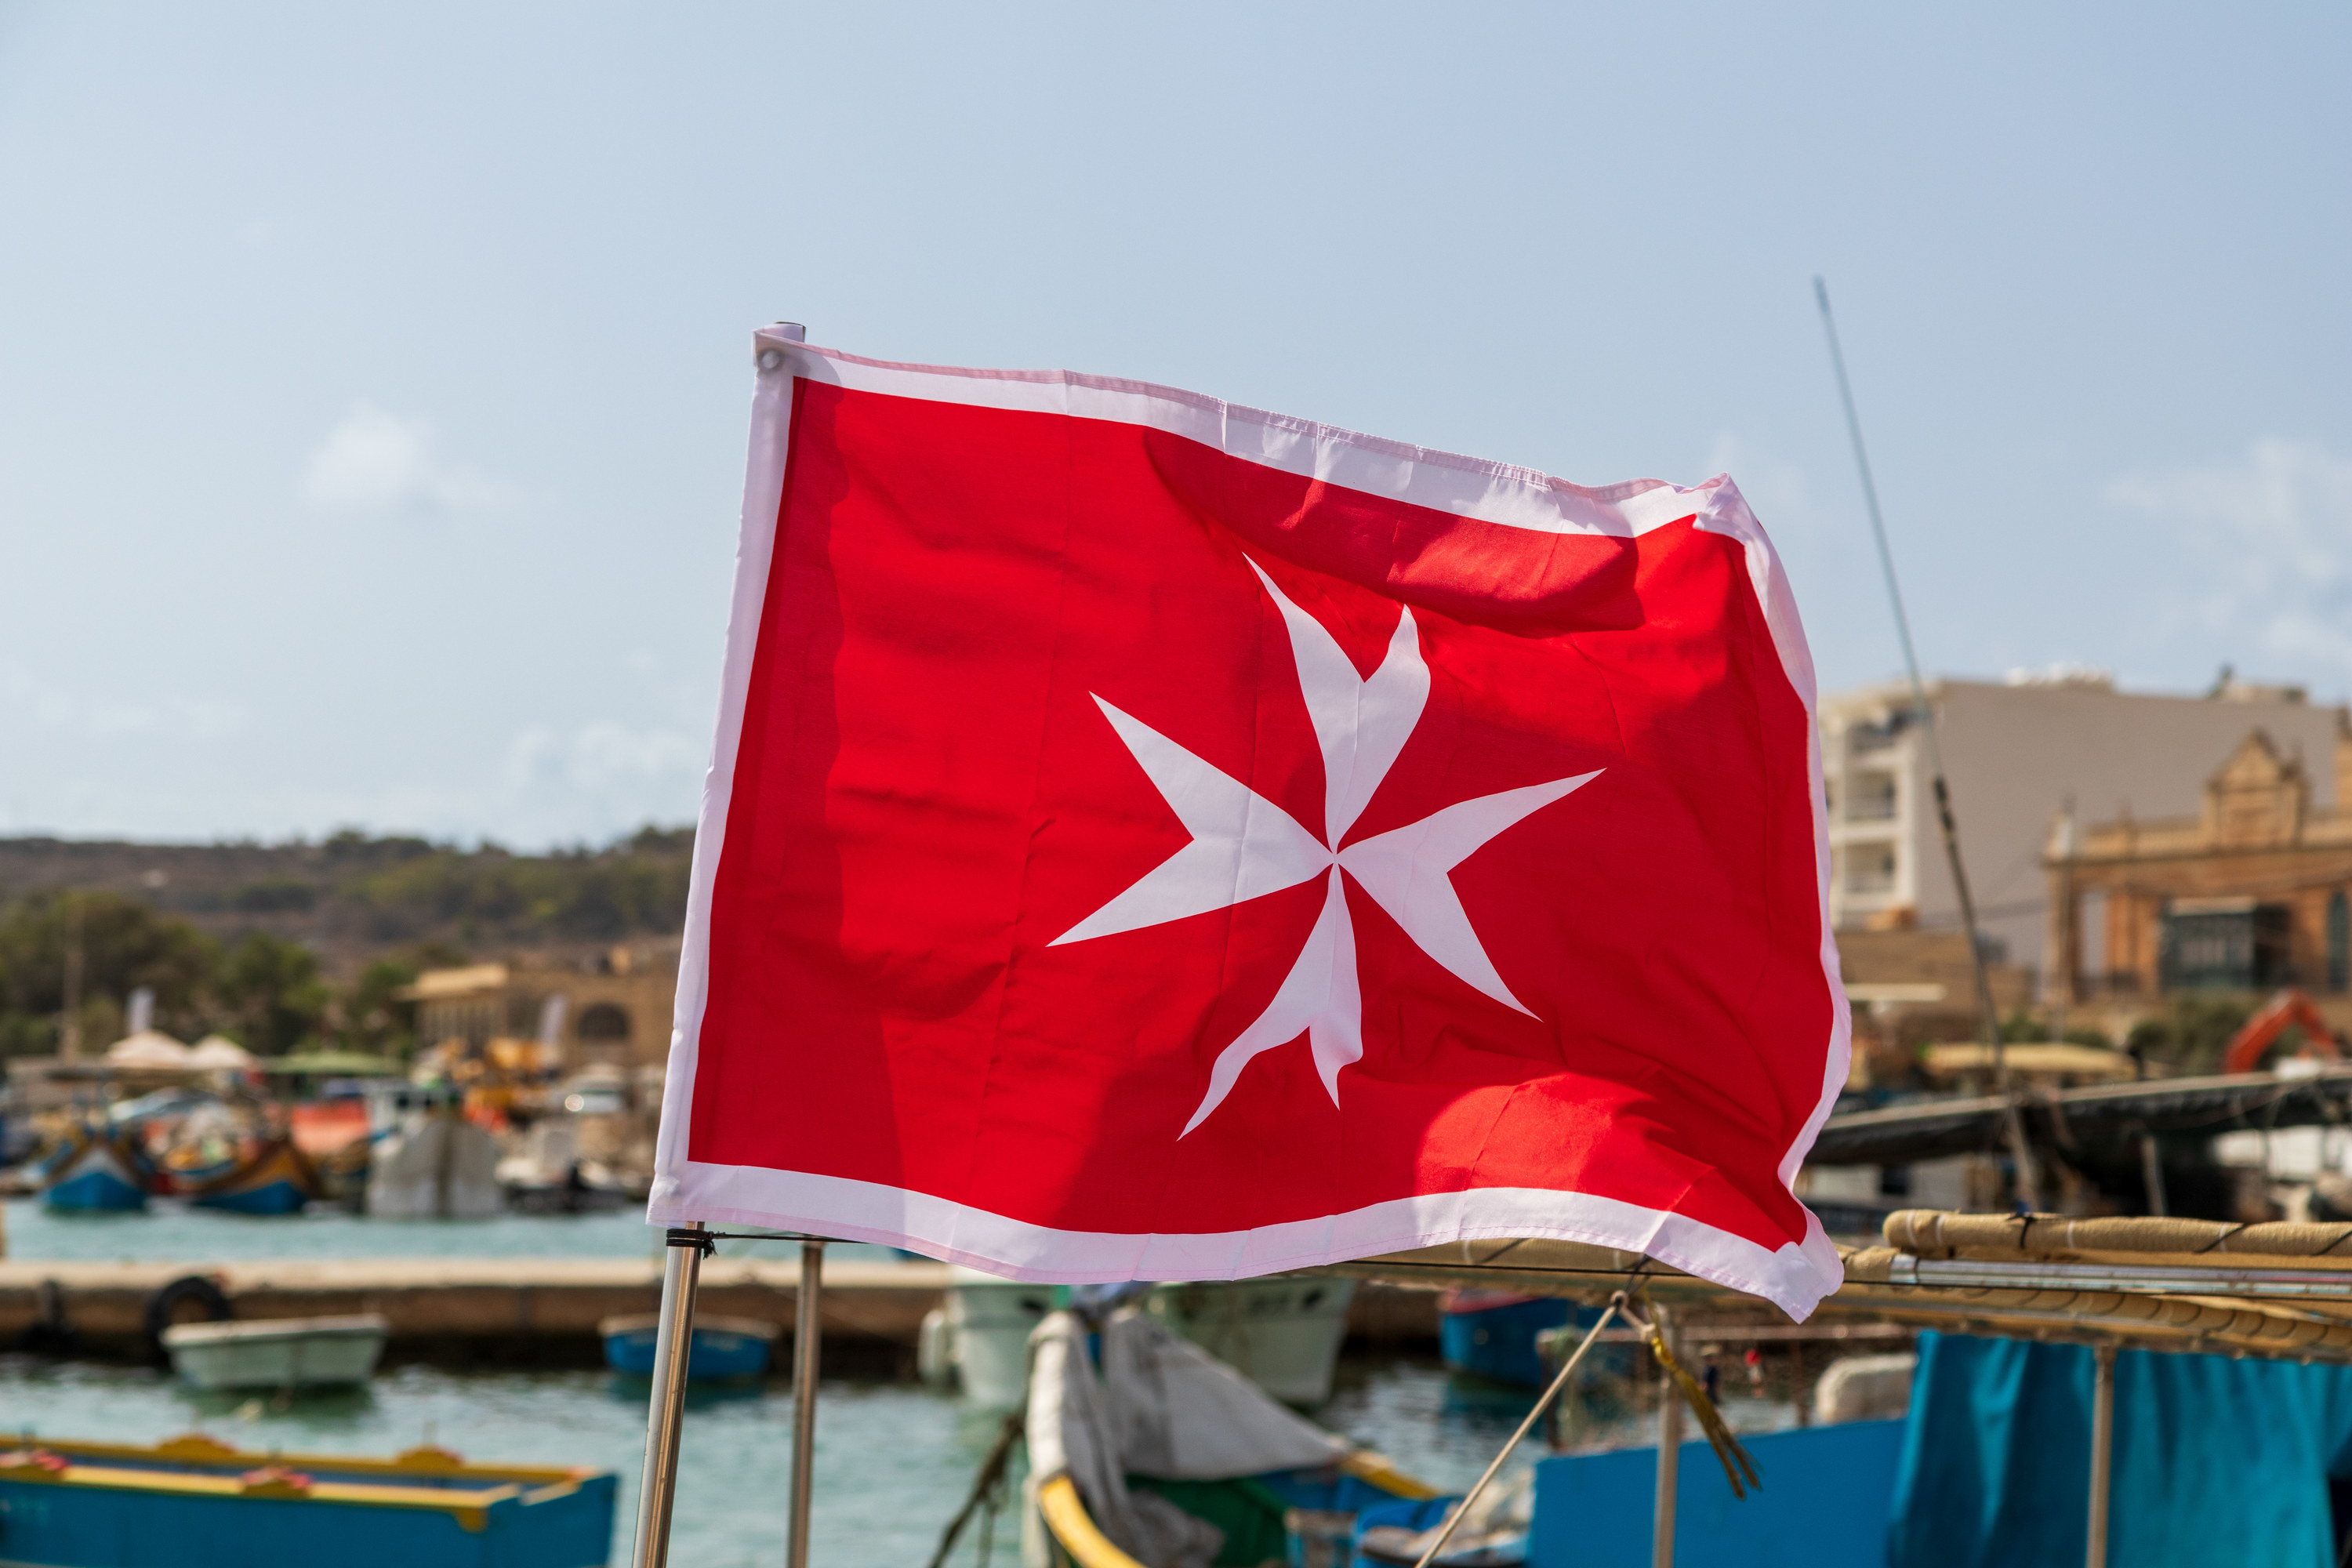 Marine flag of Malta flying, a white-red flag with a George Cross